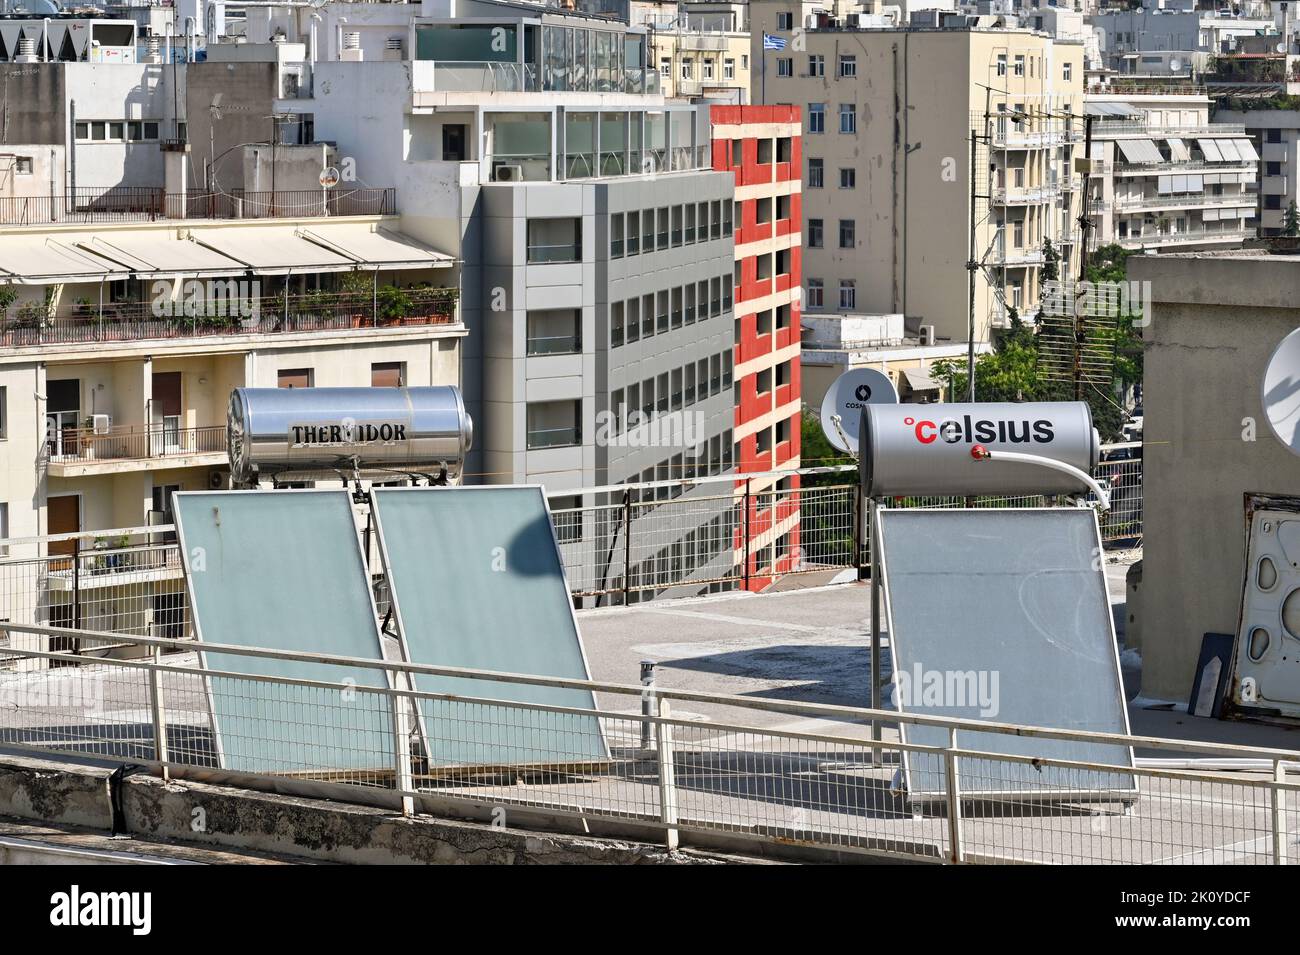 Athens, Greece - May 2022: Hot water heating system on the roof of a building in the city centre Stock Photo